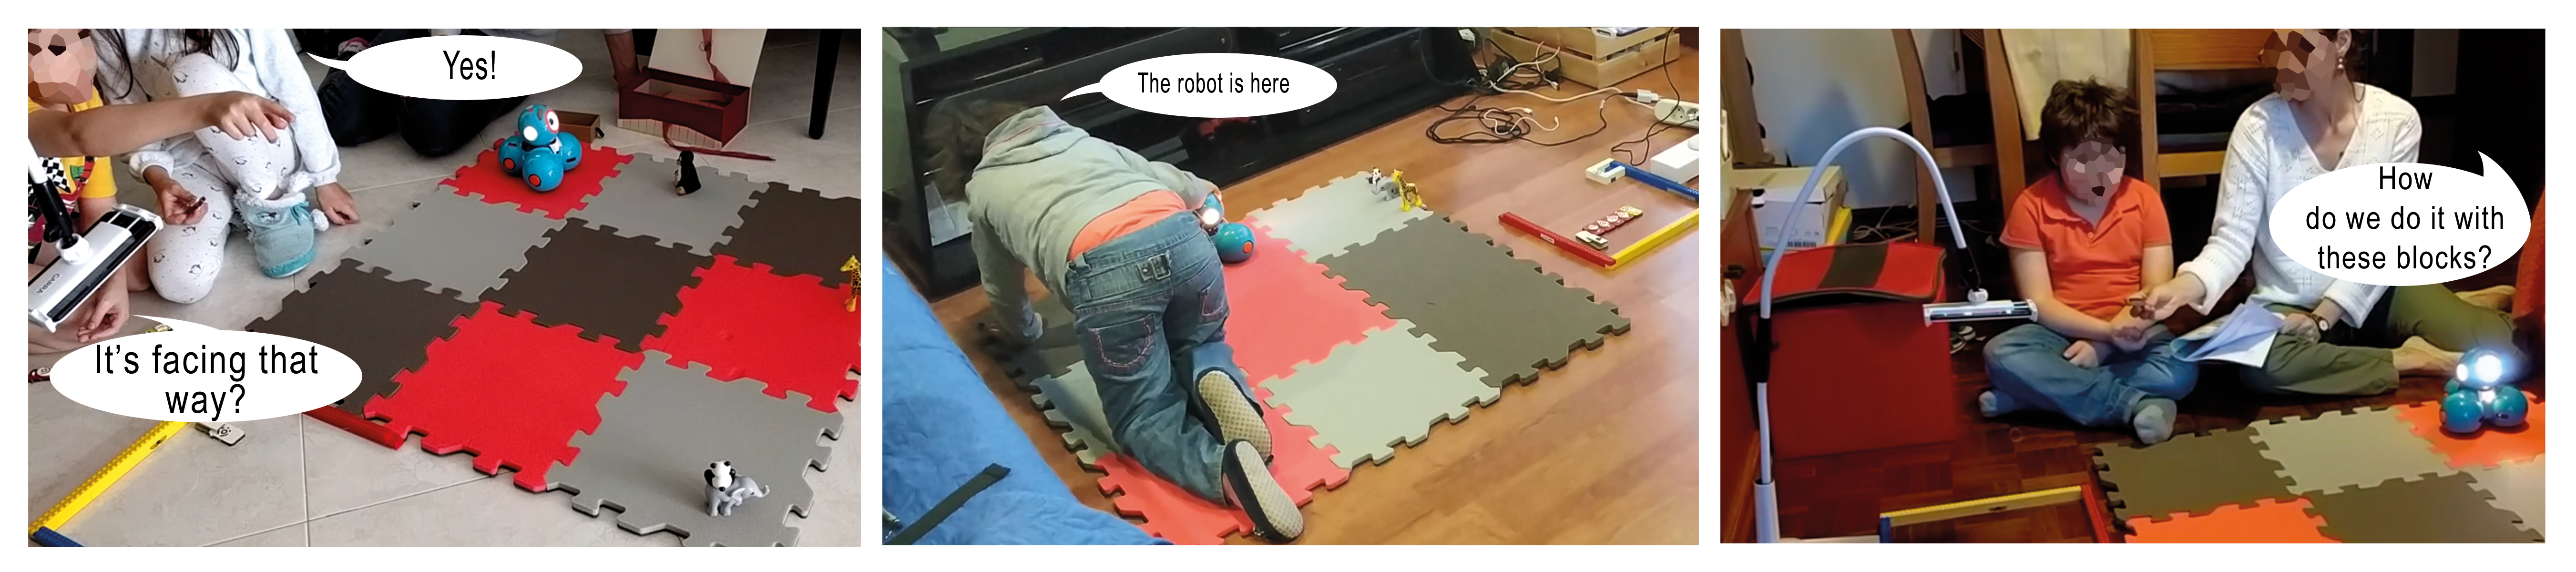 Three pictures demonstrating families' interaction with the system. Left: Two children are around the setup. The visually impaired child confirms with his sighted sibling to where the robot is facing. Middle: Child crawls on the map searching for the robot. Right: Parent and child facing the setup. Parent is asking questions to engage child in play.